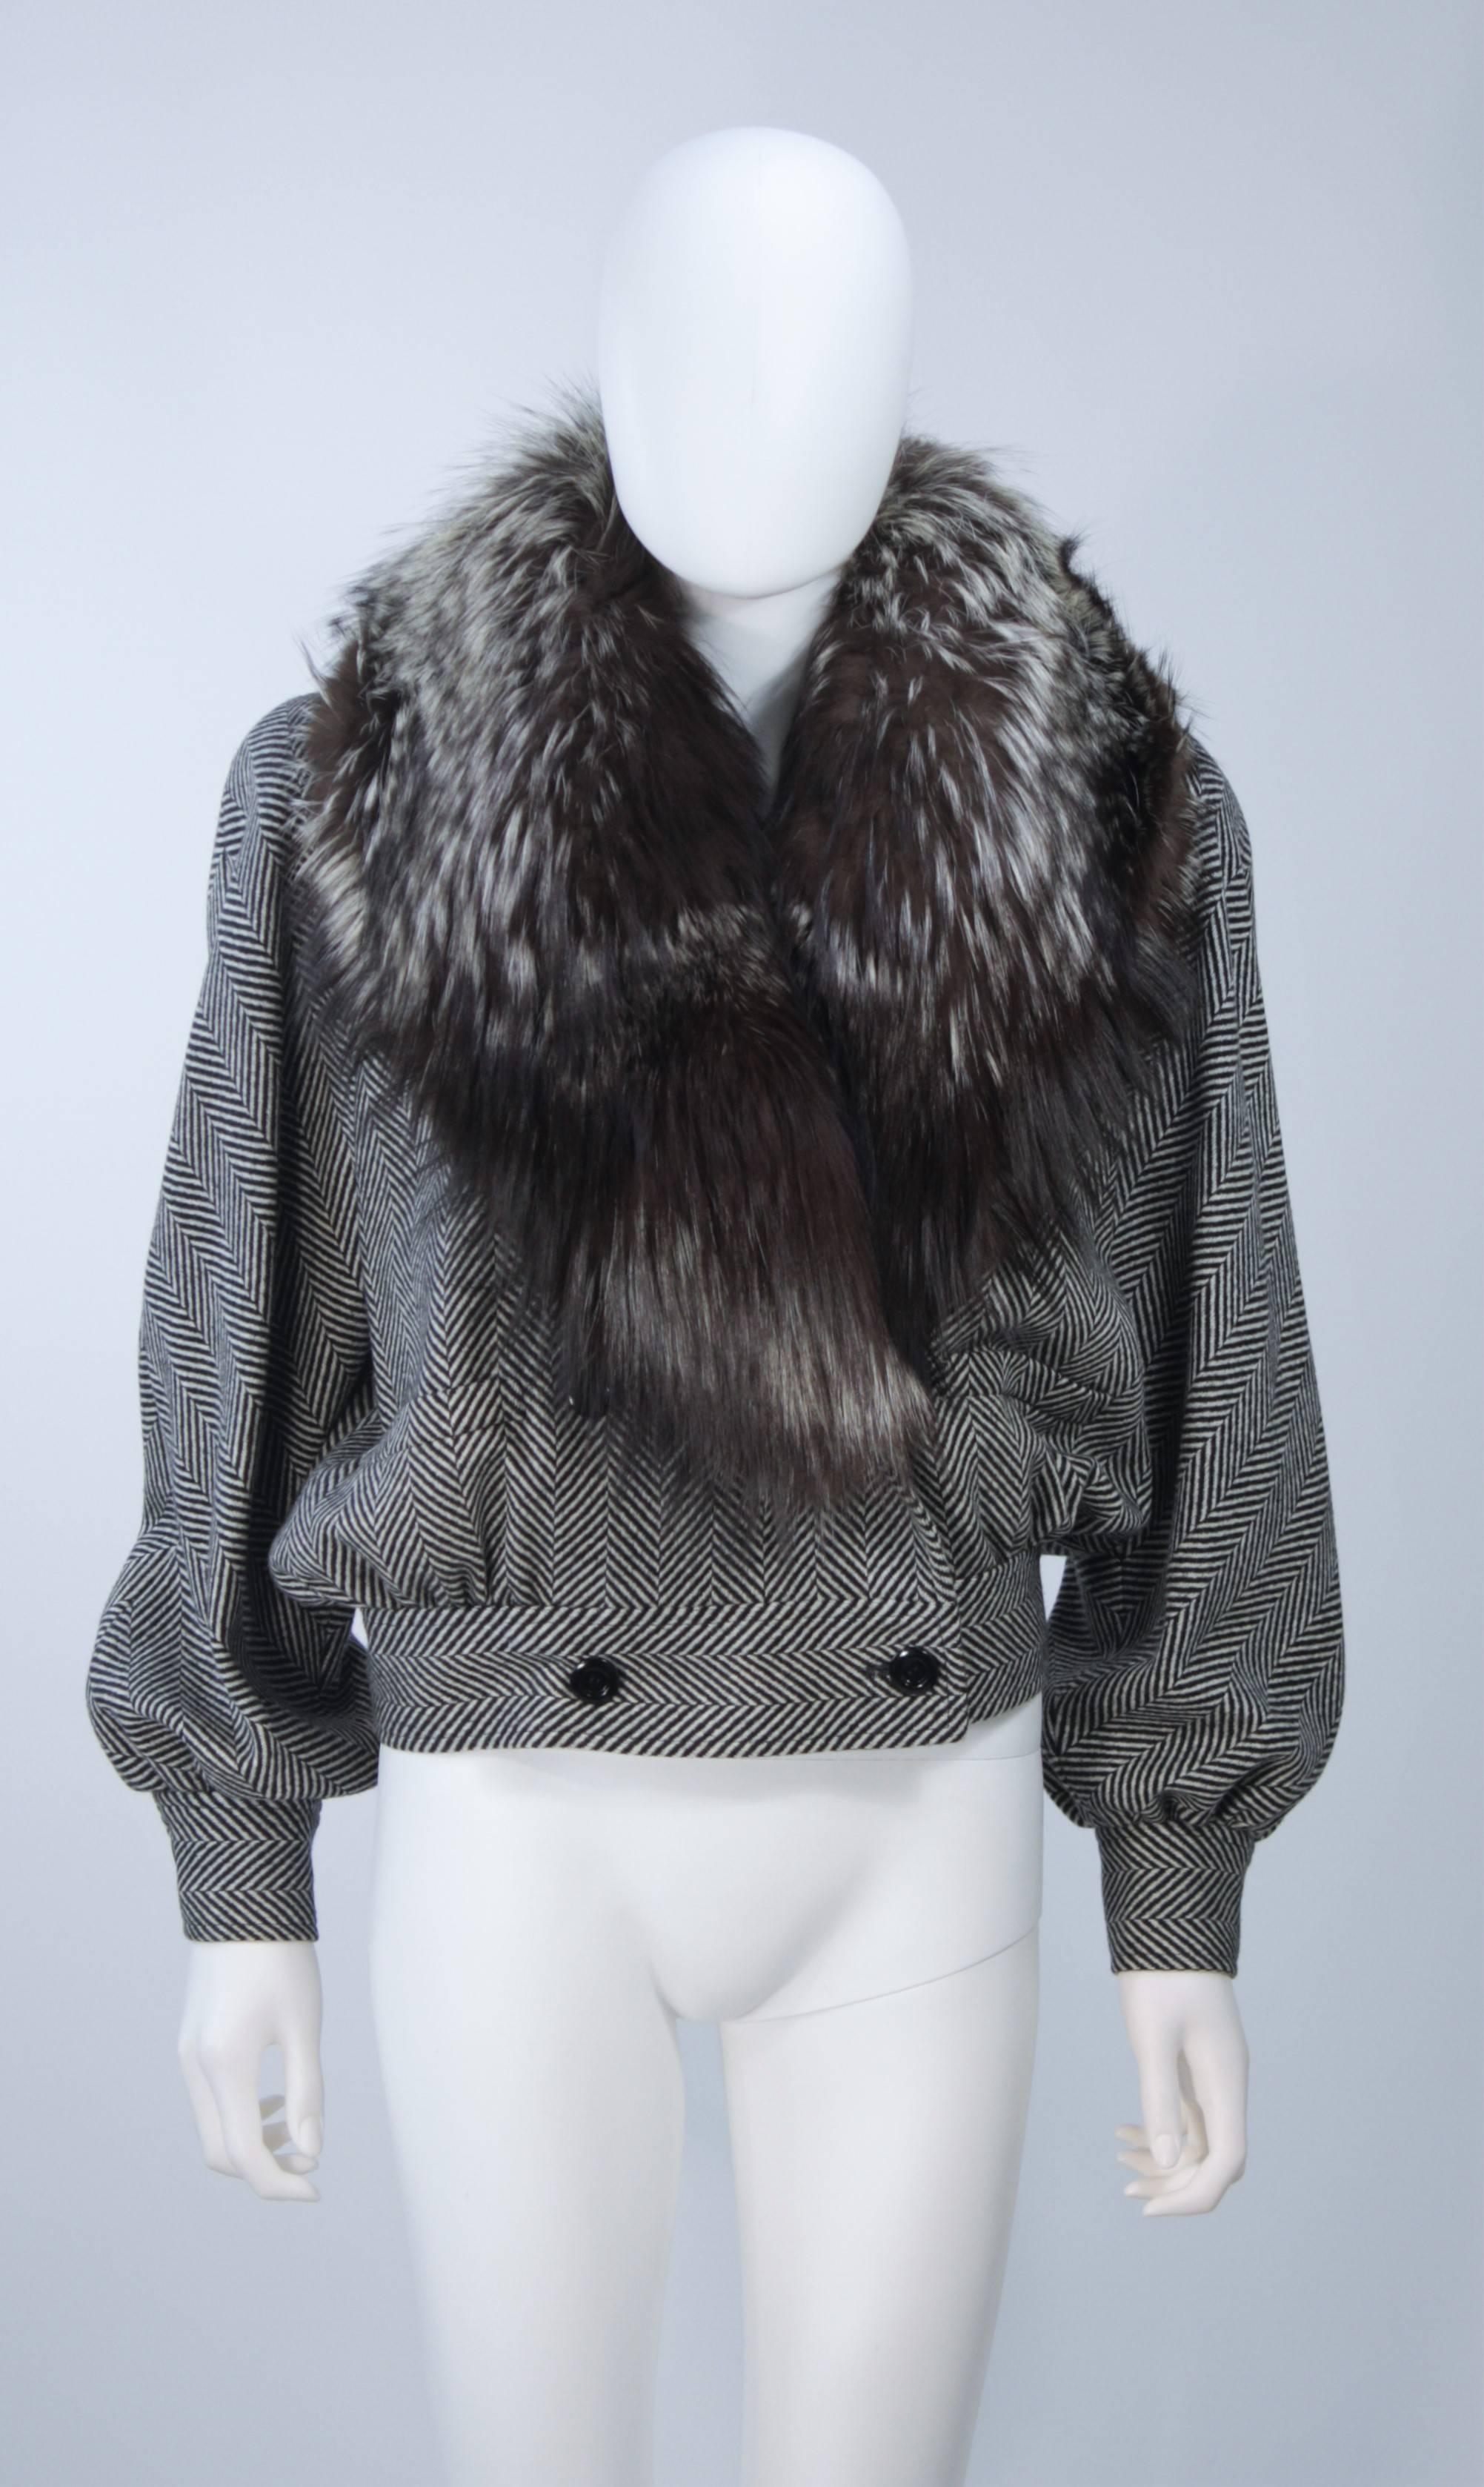  This Valentino jacket is composed of a black and white wool bomber style jacket with a brown and cream fox collar. The jacket has front button closures with a double breasted style, and front pockets. There are shoulder pads.  In excellent vintage